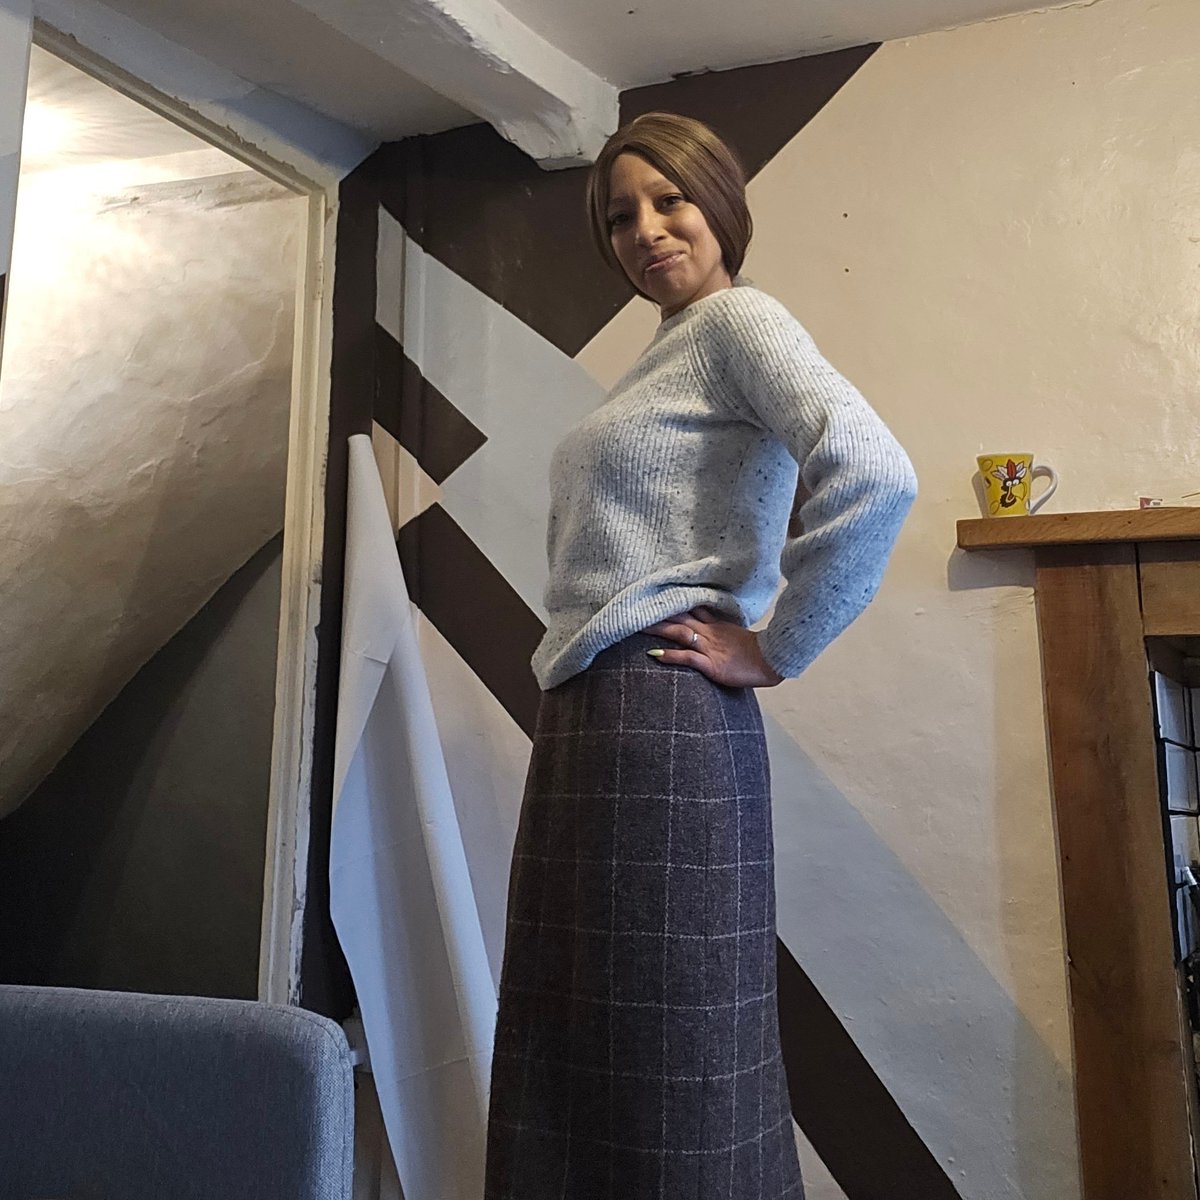 I'm seeing alot of #tweed on here looking good and #sexy.
So thought I'd jump in with this lovely #harristweed #skirt
Show us your #tartan or tweed xxx